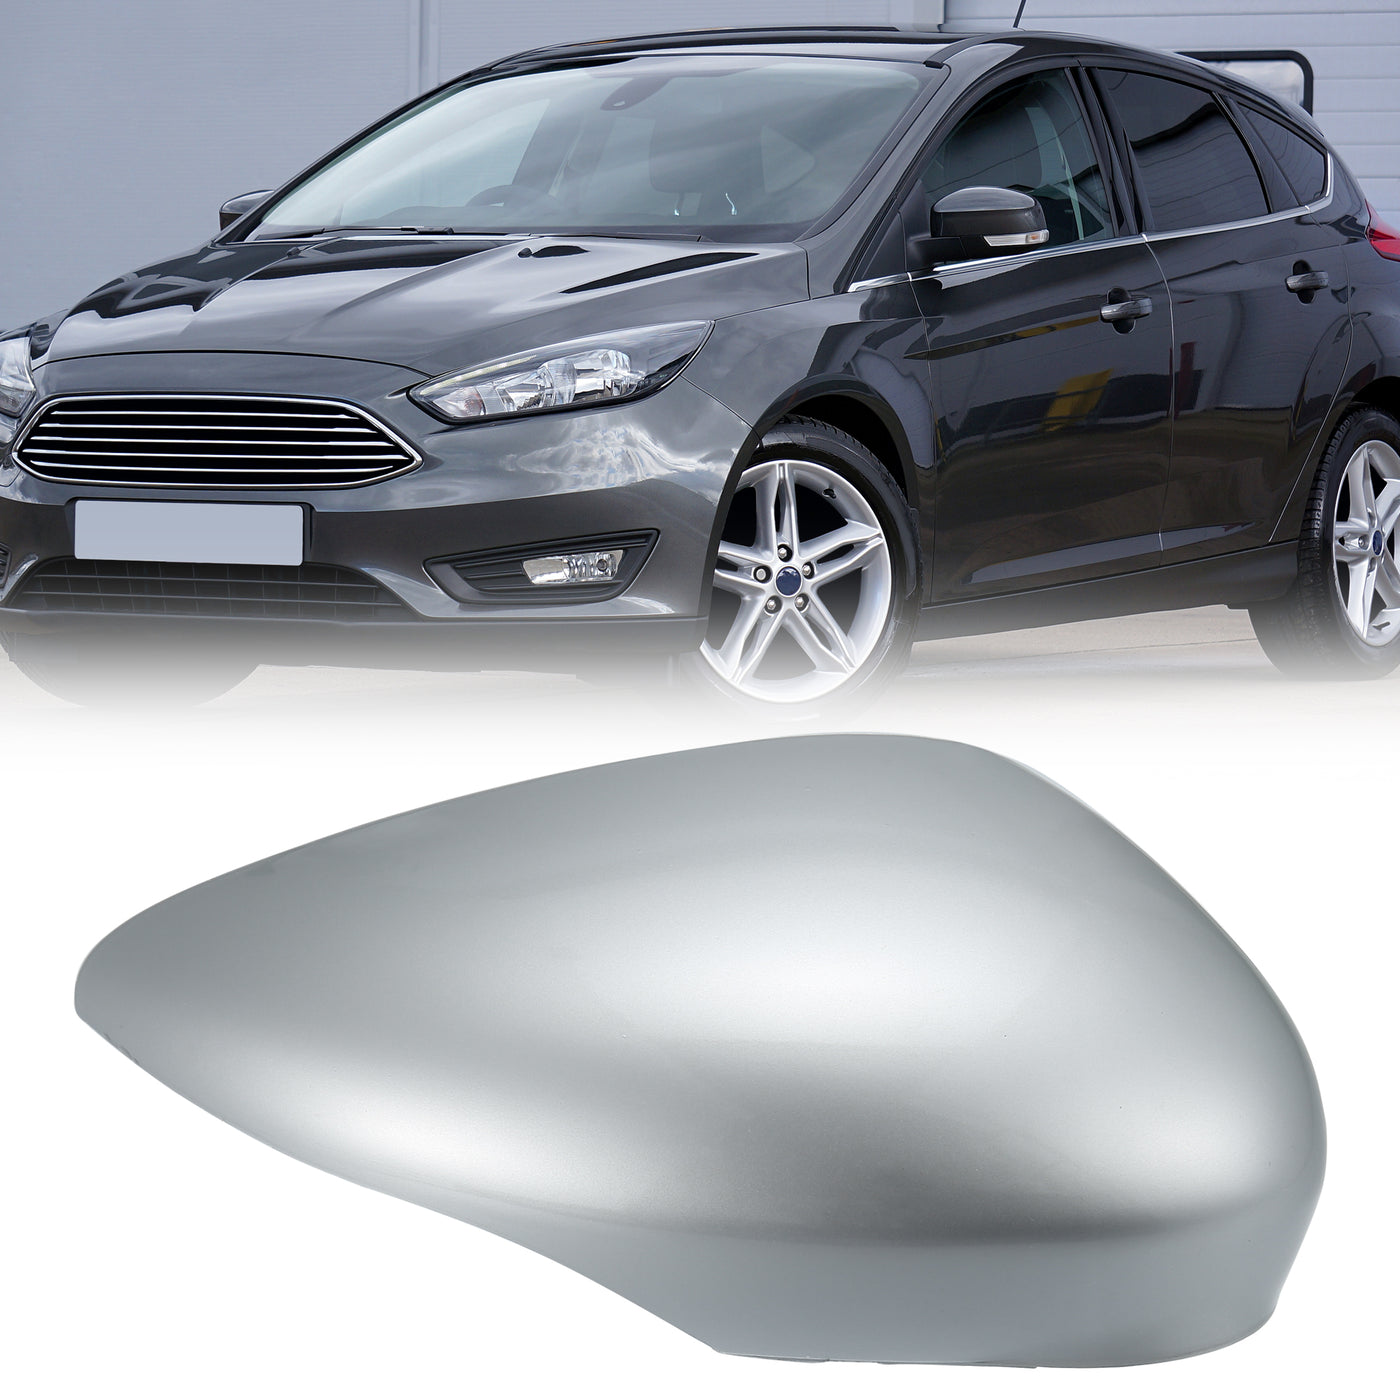 X AUTOHAUX Silver Tone Right Side Car Side Door Wing Mirror Cover Rear View Mirror Cap for Ford Fiesta MK7 2008 2009 2010 2011 2012 2013 2014 2015 2016 2017